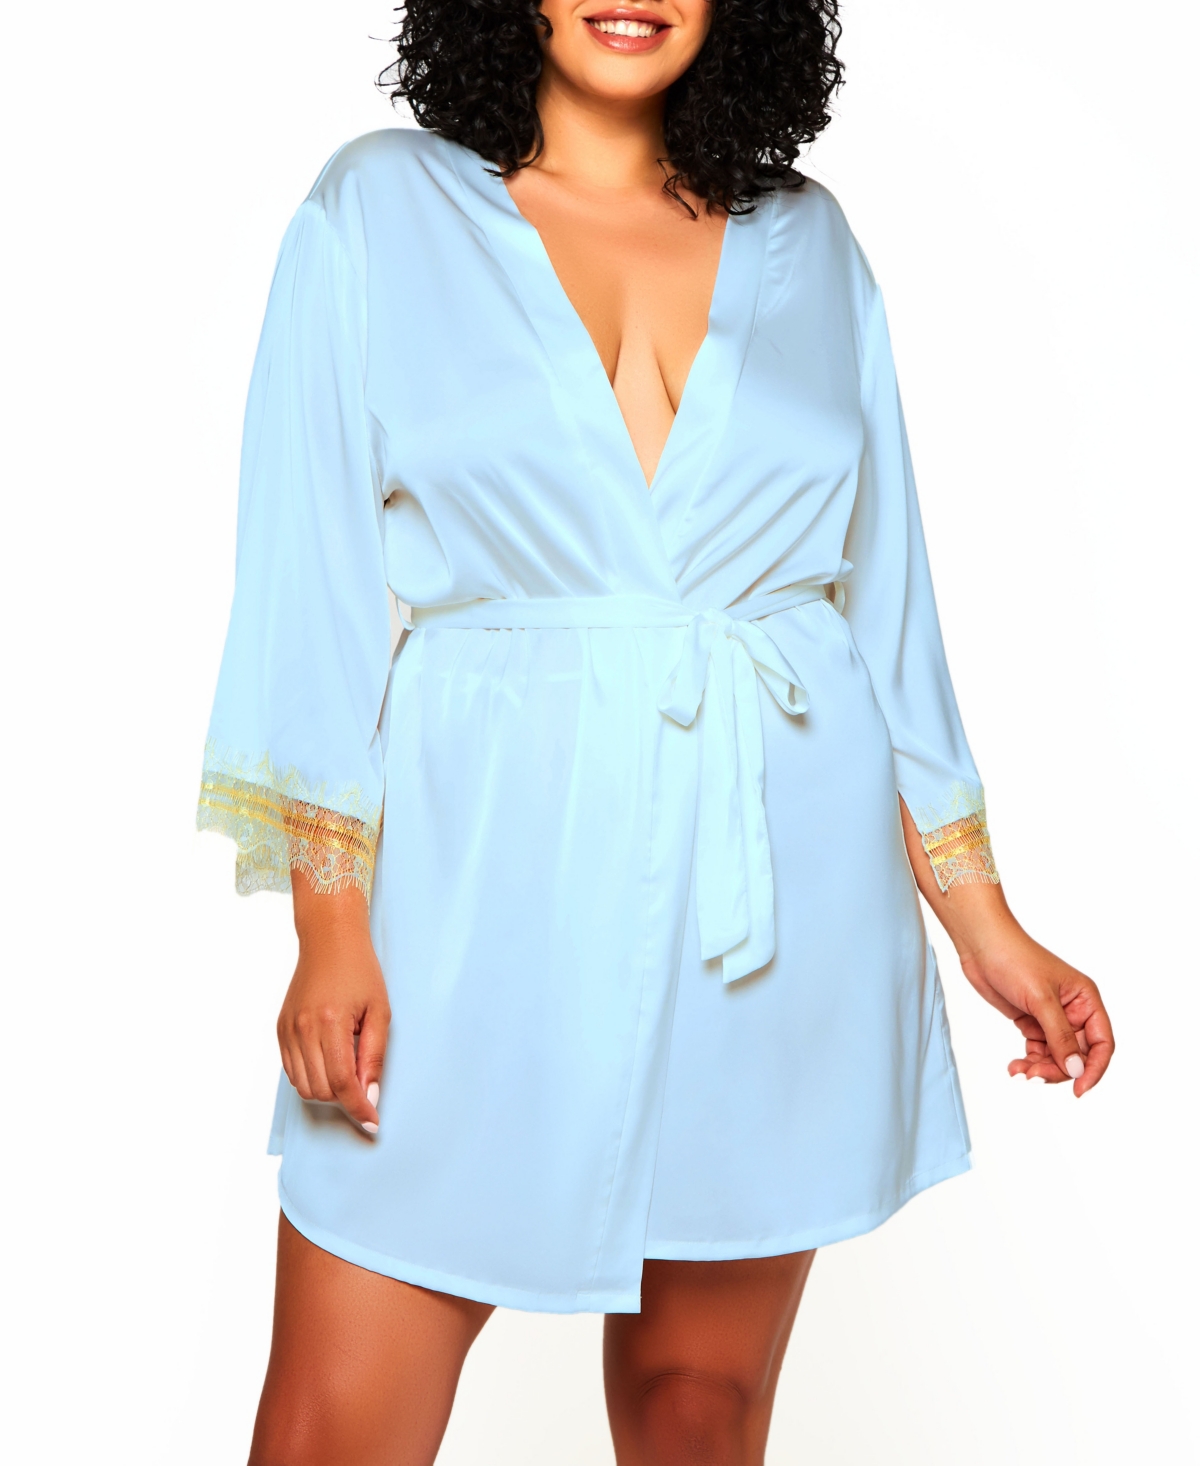 Icollection Plus Size Alison Satin and Lace Trimmed Split Sleeve Robe